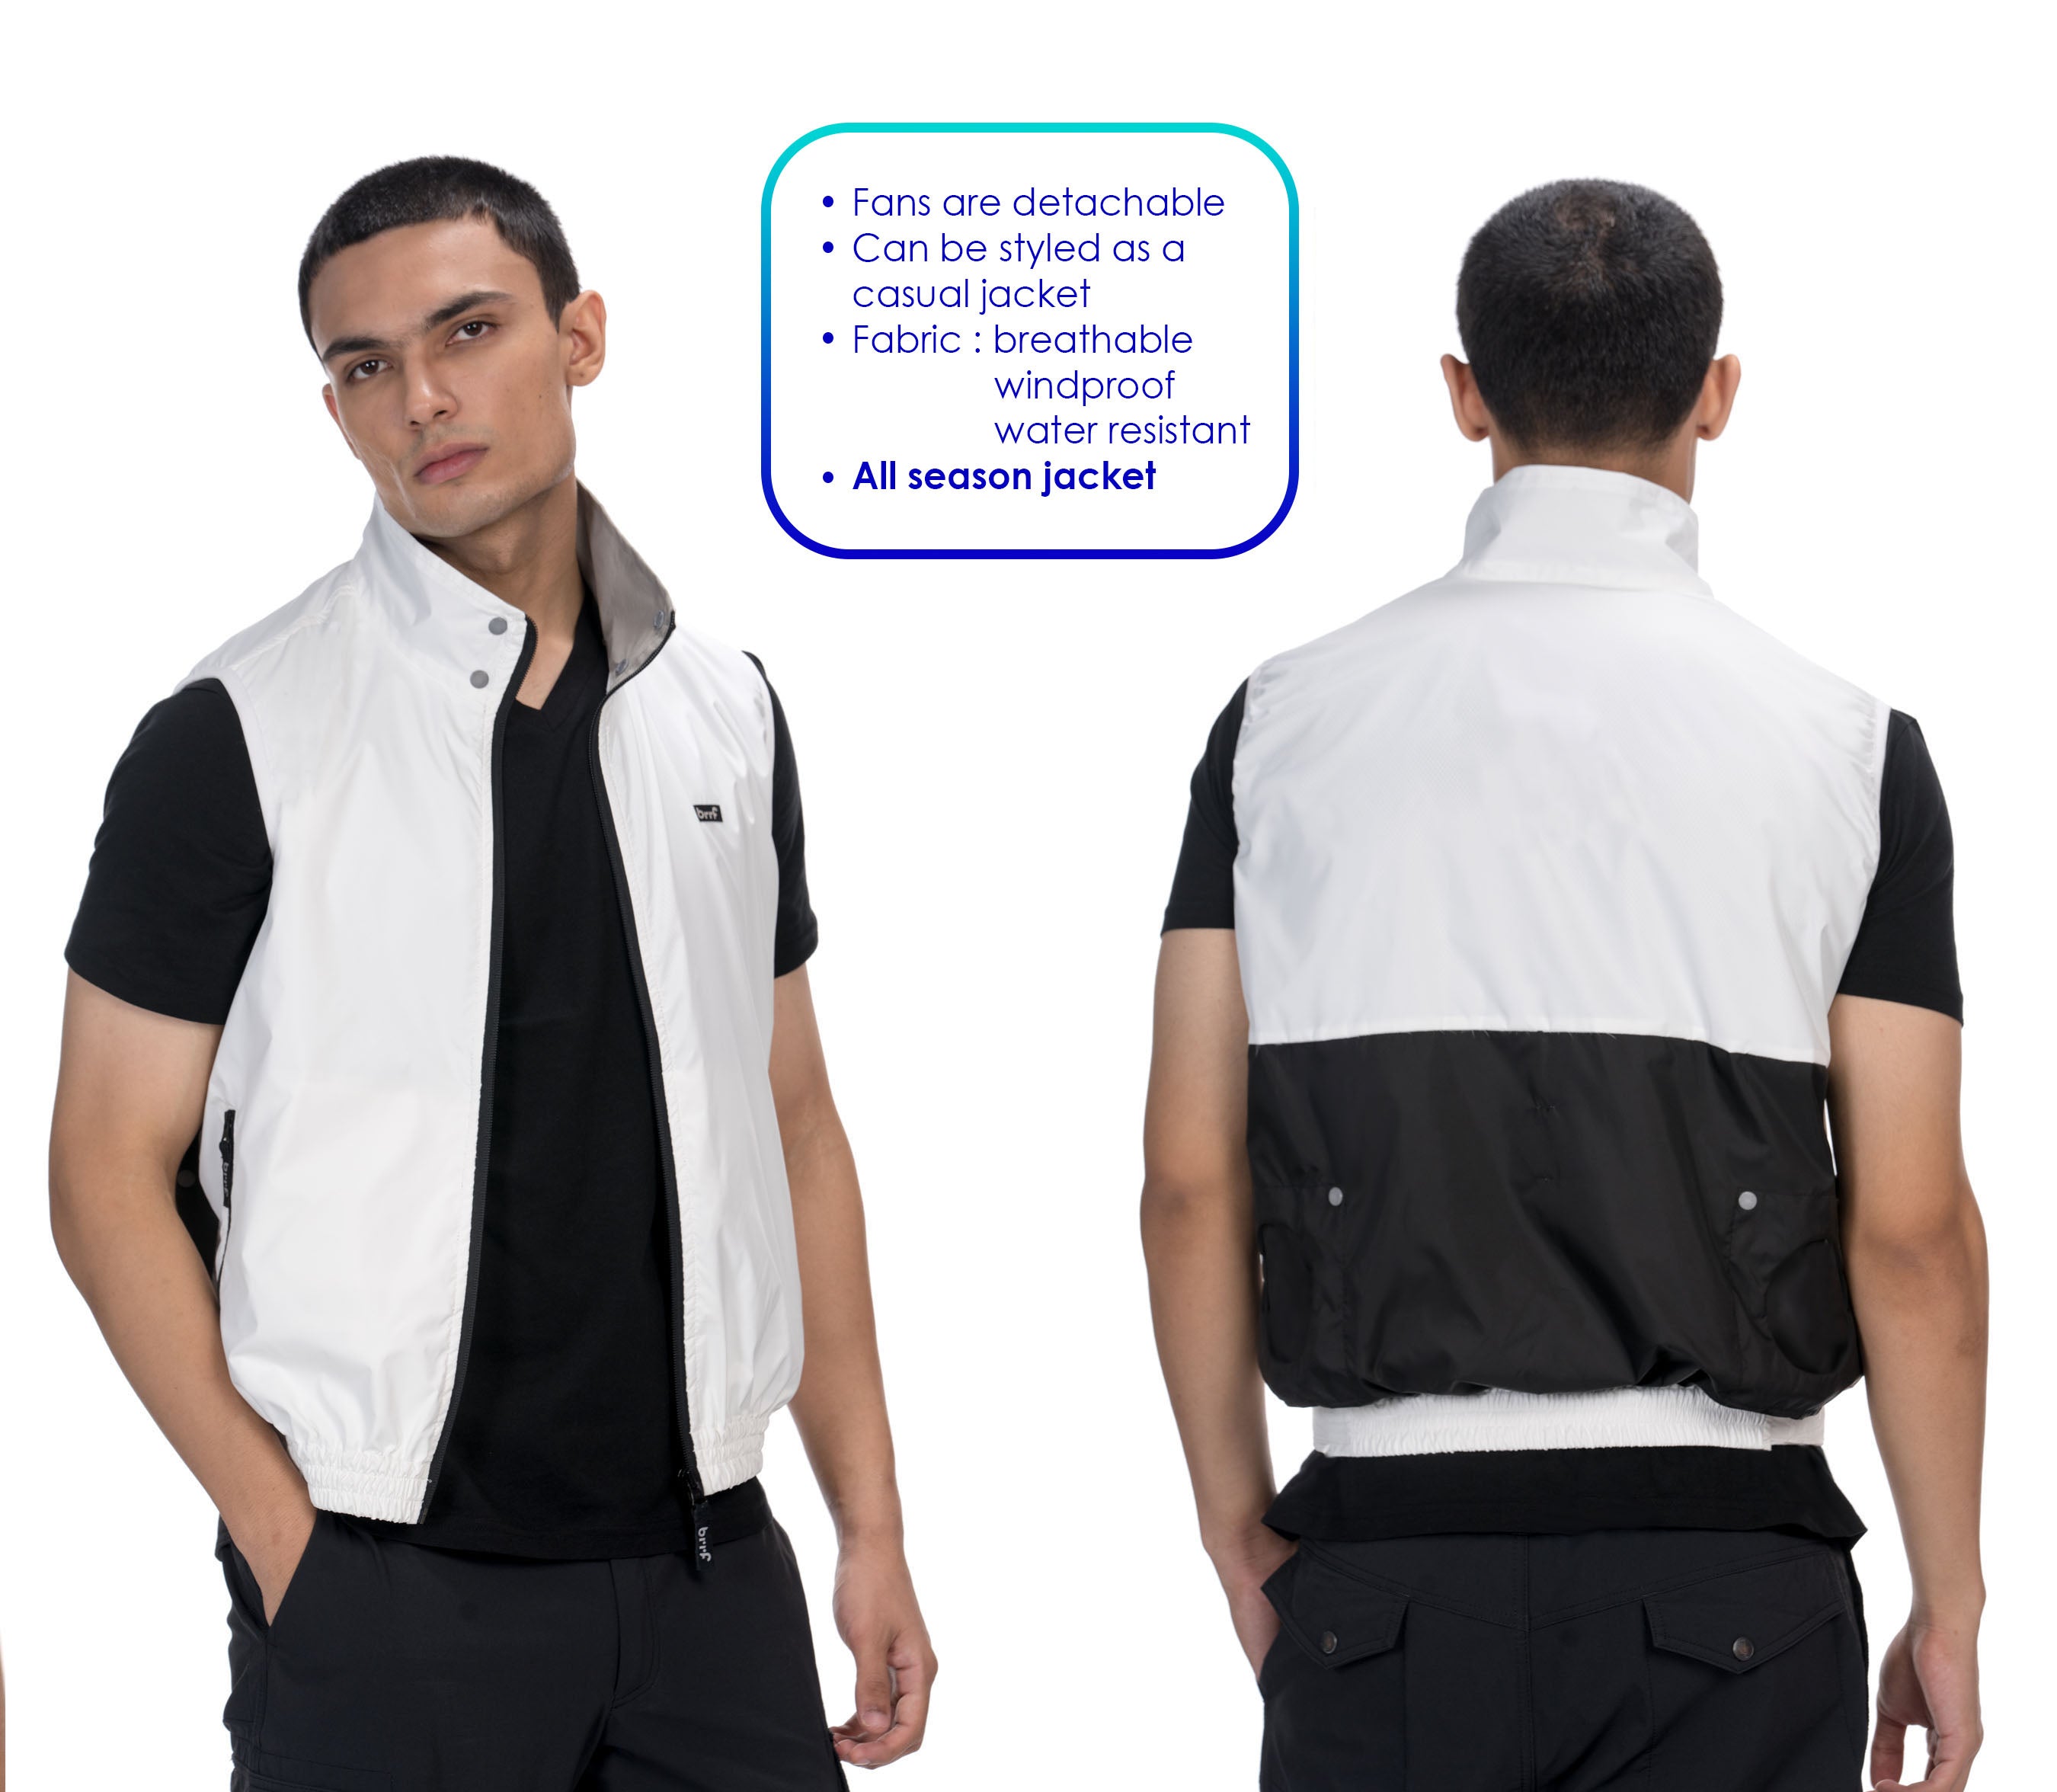 Air-Conditioned Clothing - Sleek Style - brrf basic (with 10,000 mAh Power Bank included)